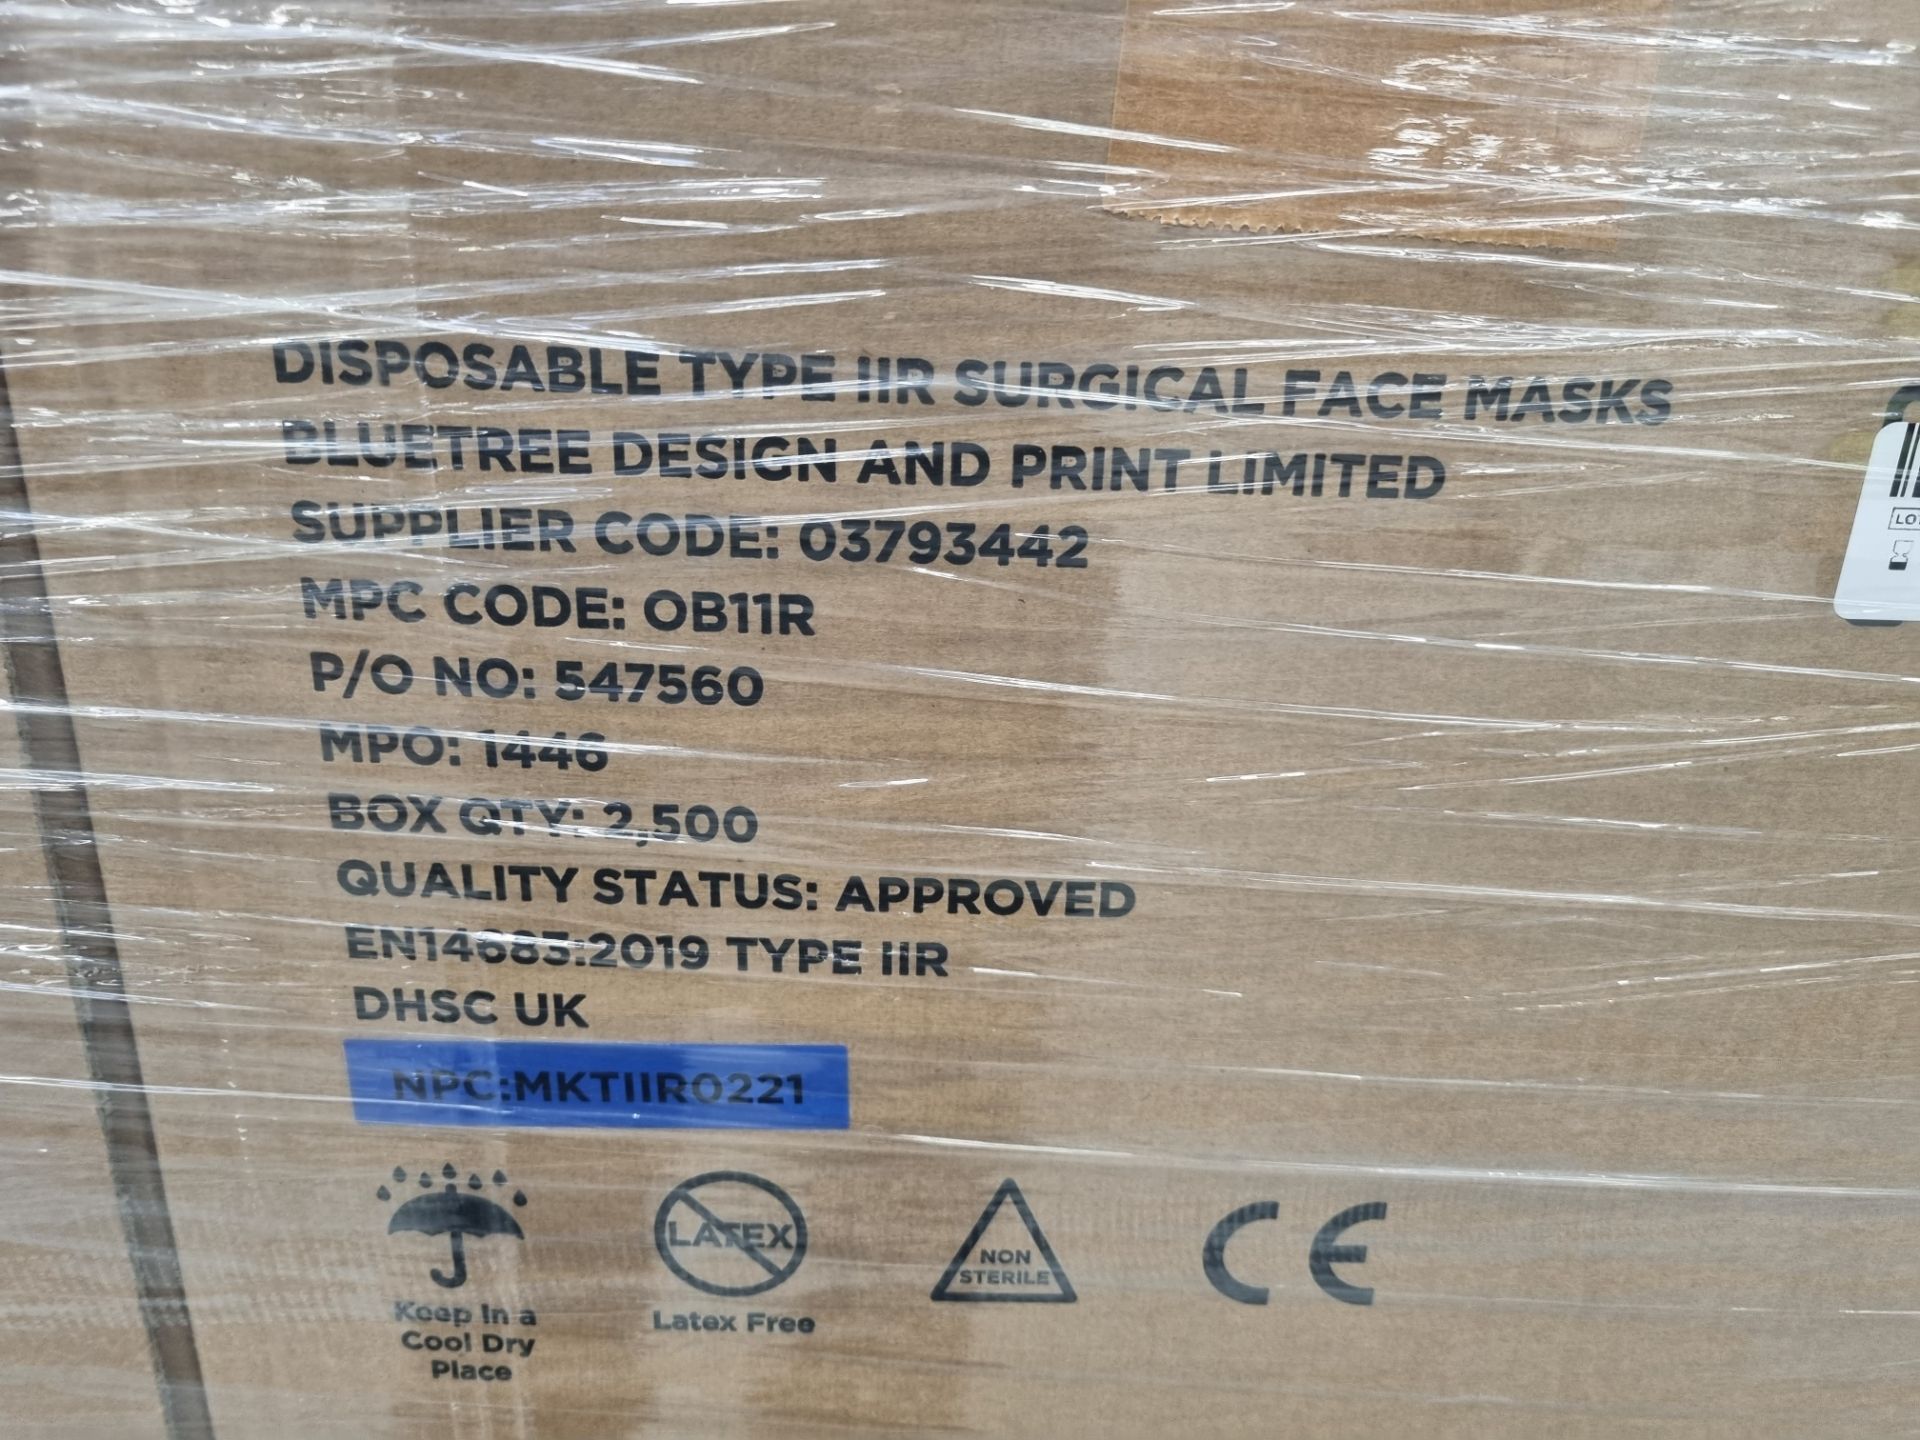 27x pallets across 3 rows of Disposable Type 11R Surgical Masks/Face Masks - Image 2 of 2